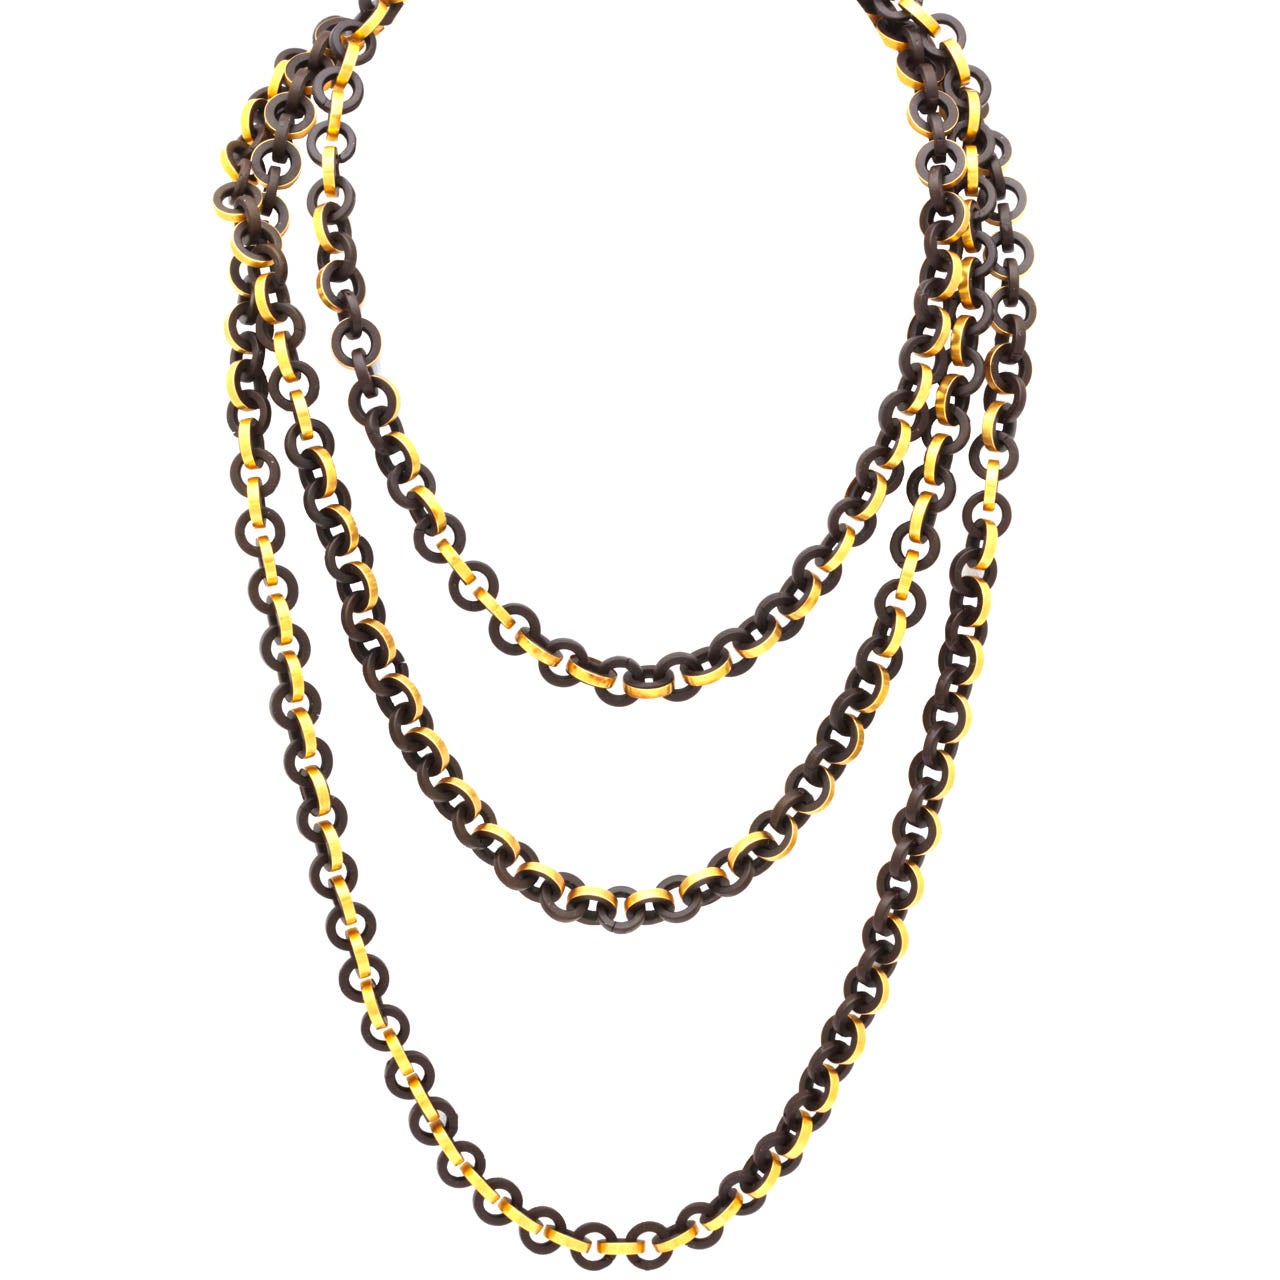 Long Victorian Gold and Vulcanite Chain 